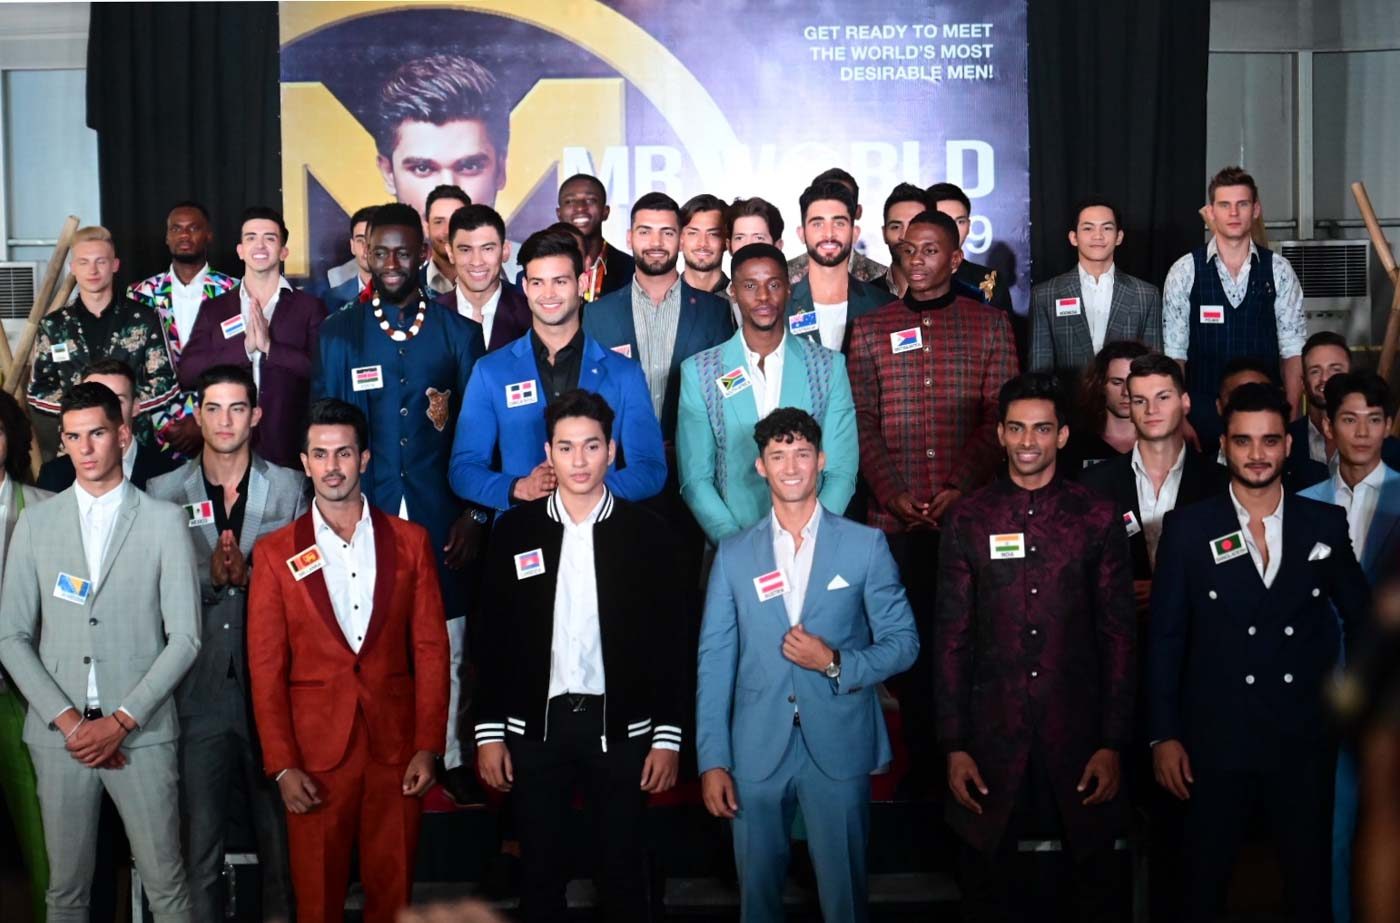 IN PHOTOS: Meet the candidates of Mr World 2019